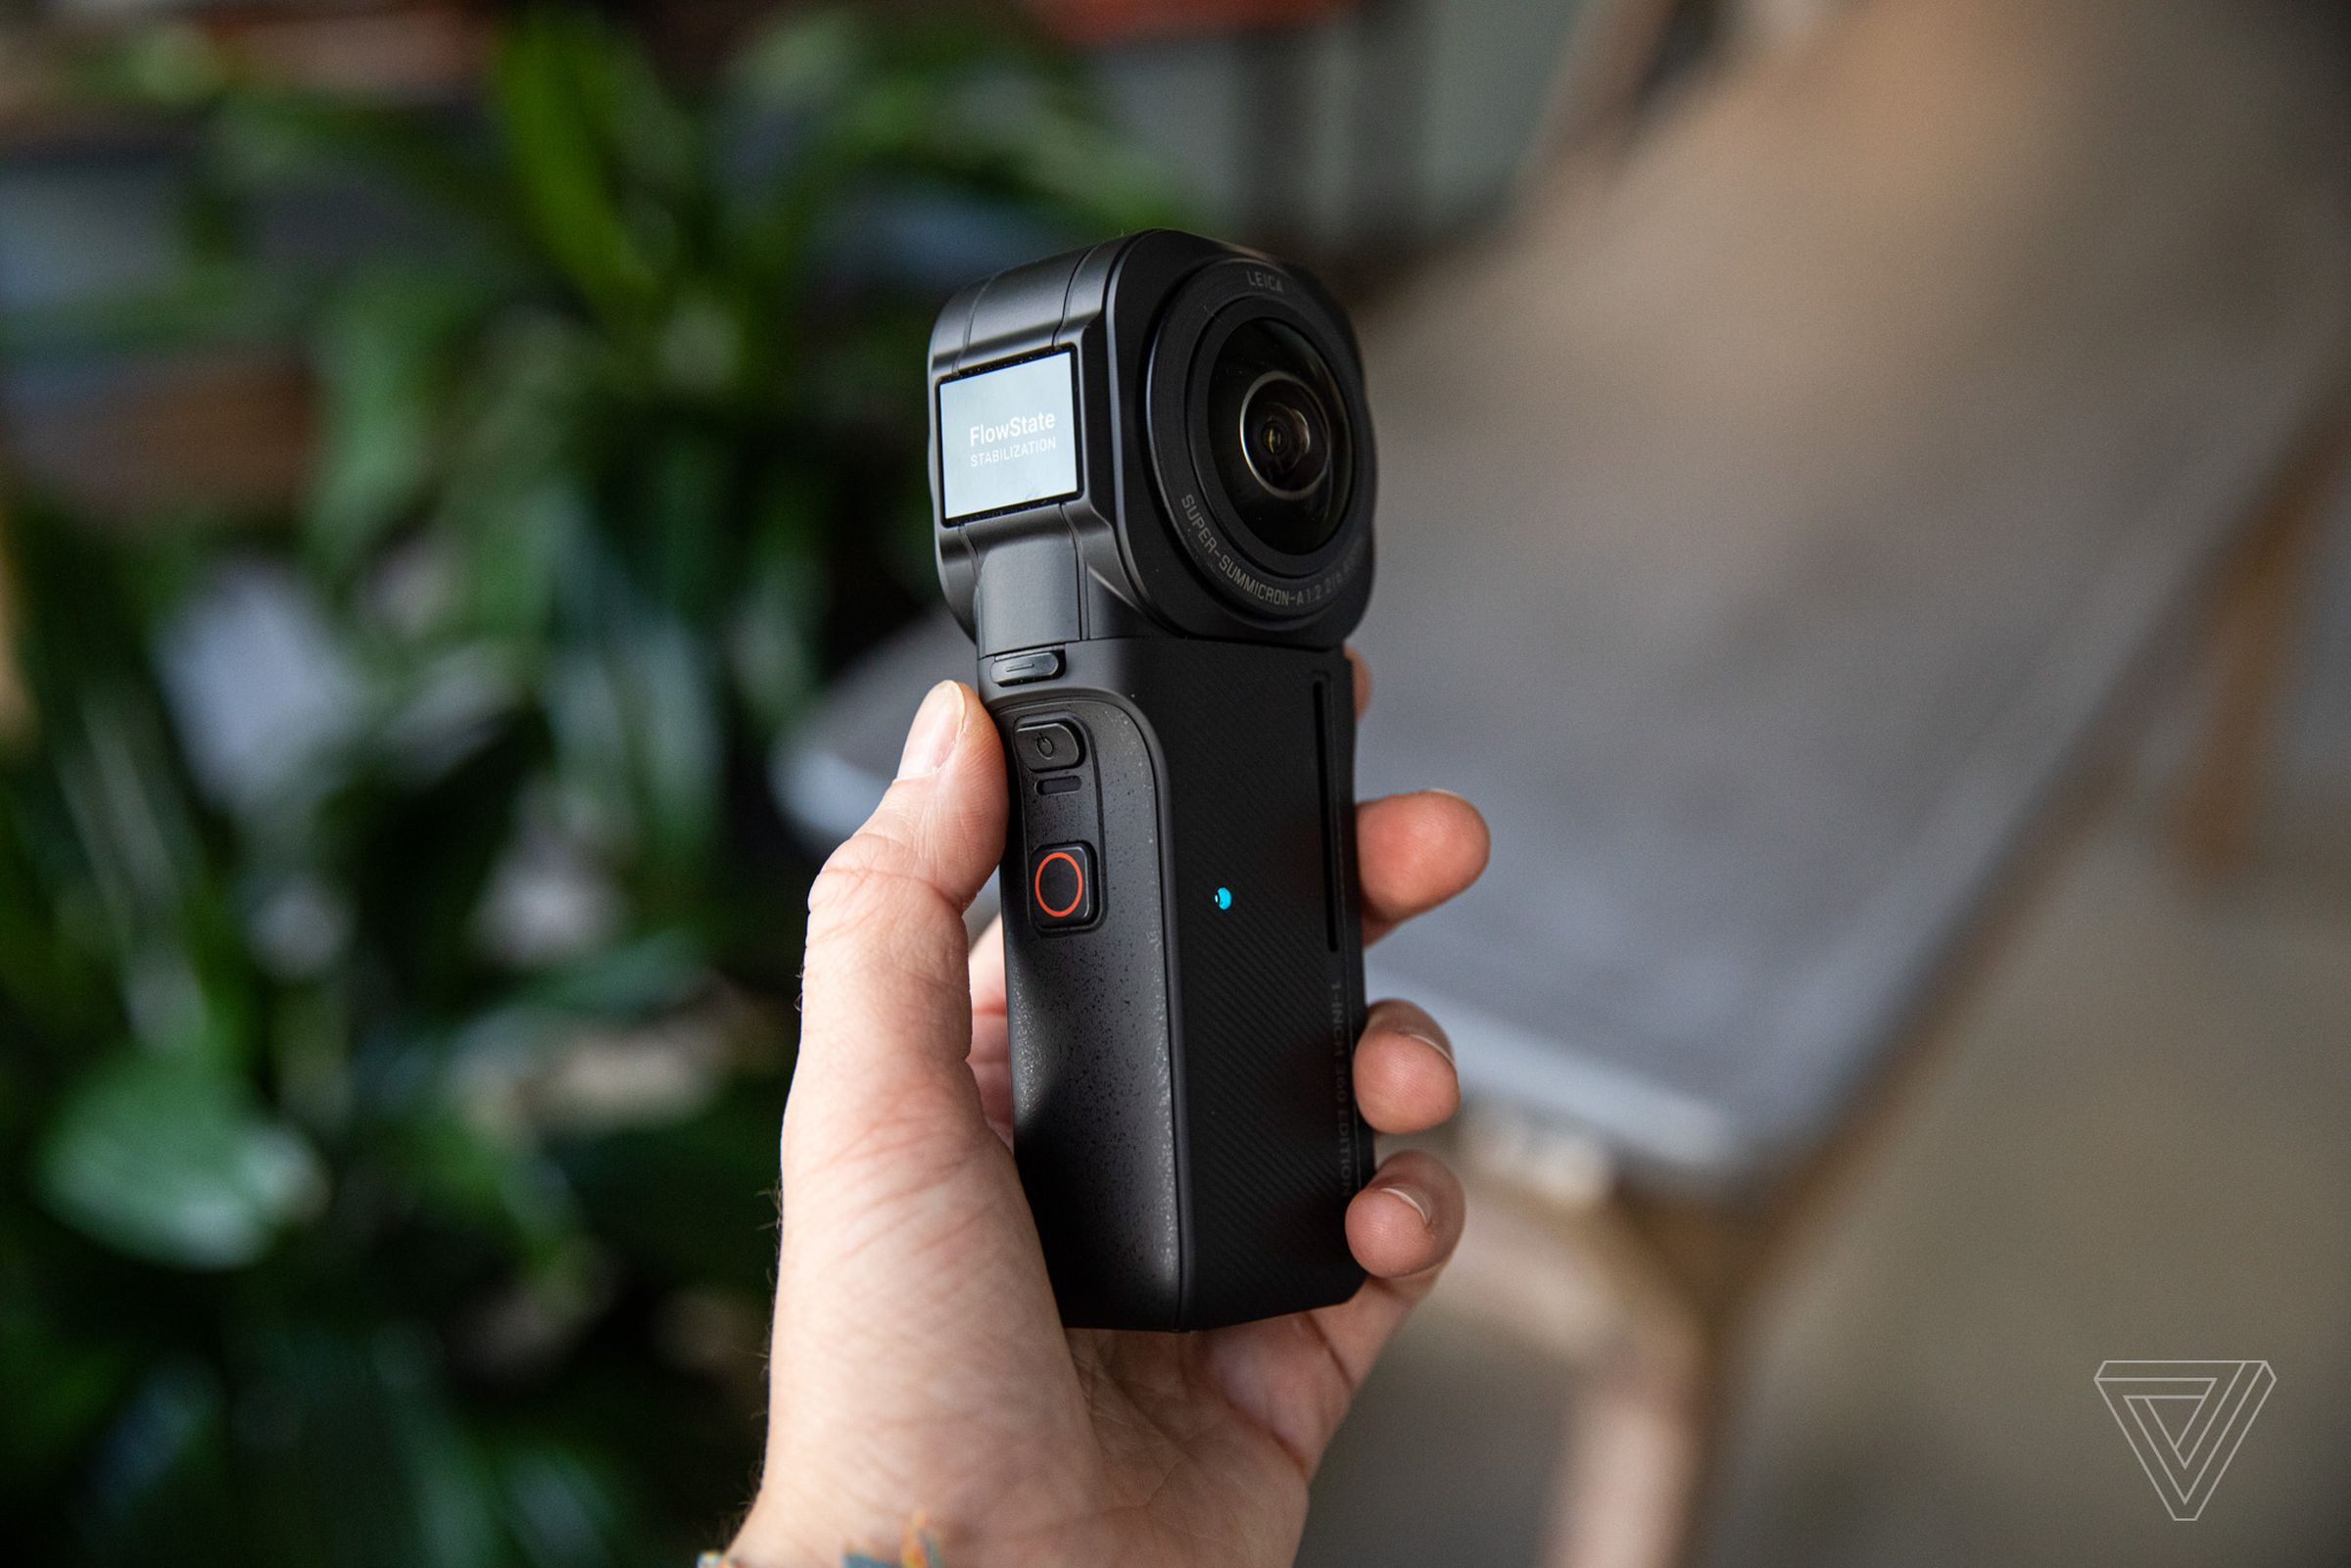 The power and record button are easy to press while using the camera with one hand.